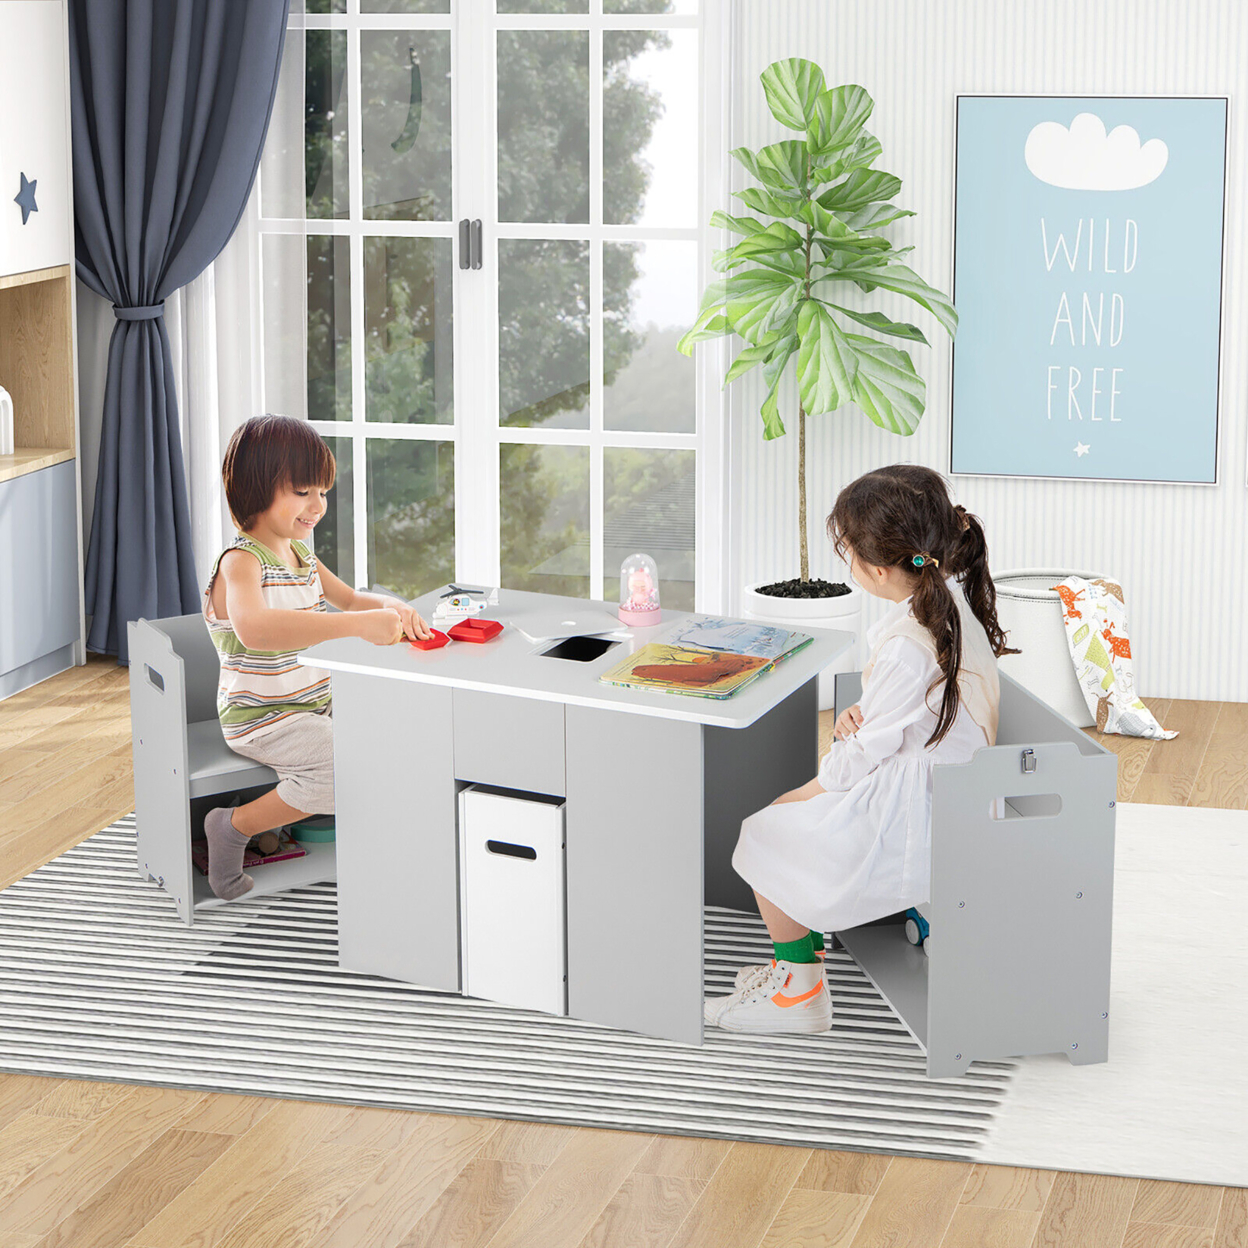 Kids Table And 2 Chairs Set, 4-in-1 Desk & Chair Set W/ Storage Grey + White